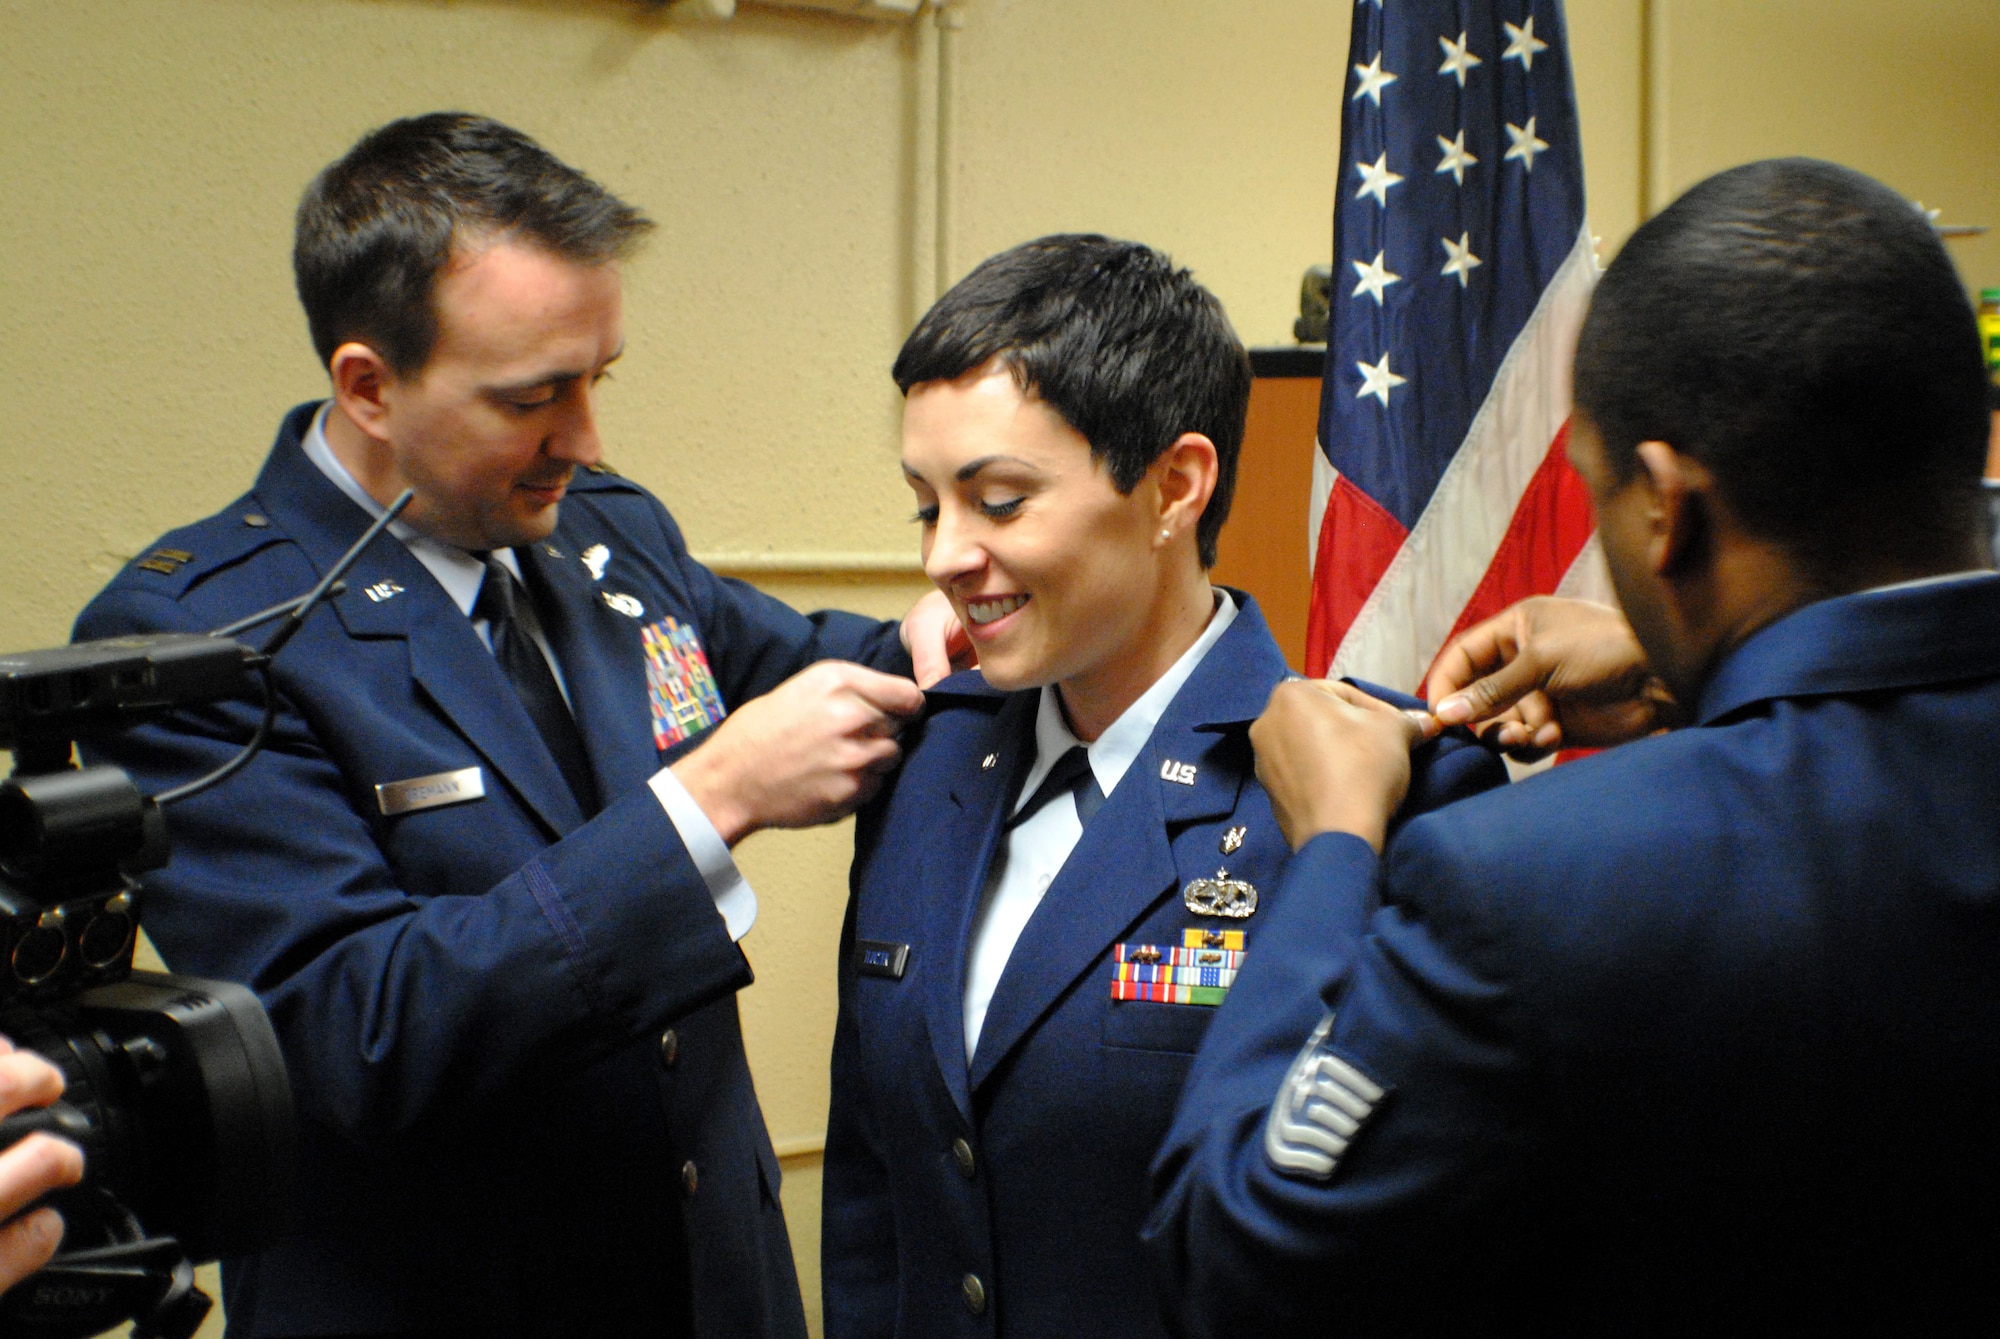 Capt. Timothy Dremann (left), Air Force ROTC Detachment 610 recruiting flight commander and Tech. Sgt. Robert Carter (right), AF ROTC Det. 610 NCO in charge pin gold bars on the shoulders of former Staff Sgt. Donna Tluczek, who became a medical officer in the Air Force during a commissioning ceremony, Feb. 2, 2012, at AF ROTC Det. 610 headquarters inside the University of North Dakota Armory. Tluczek passed North Dakota’s state boards test for nursing, solidifying both her official status as a BSN-registered nurse and commission as a second lieutenant in the United States Air Force Nurse Corps. (U.S. Air Force photo/Senior Airman Luis Loza Gutierrez)